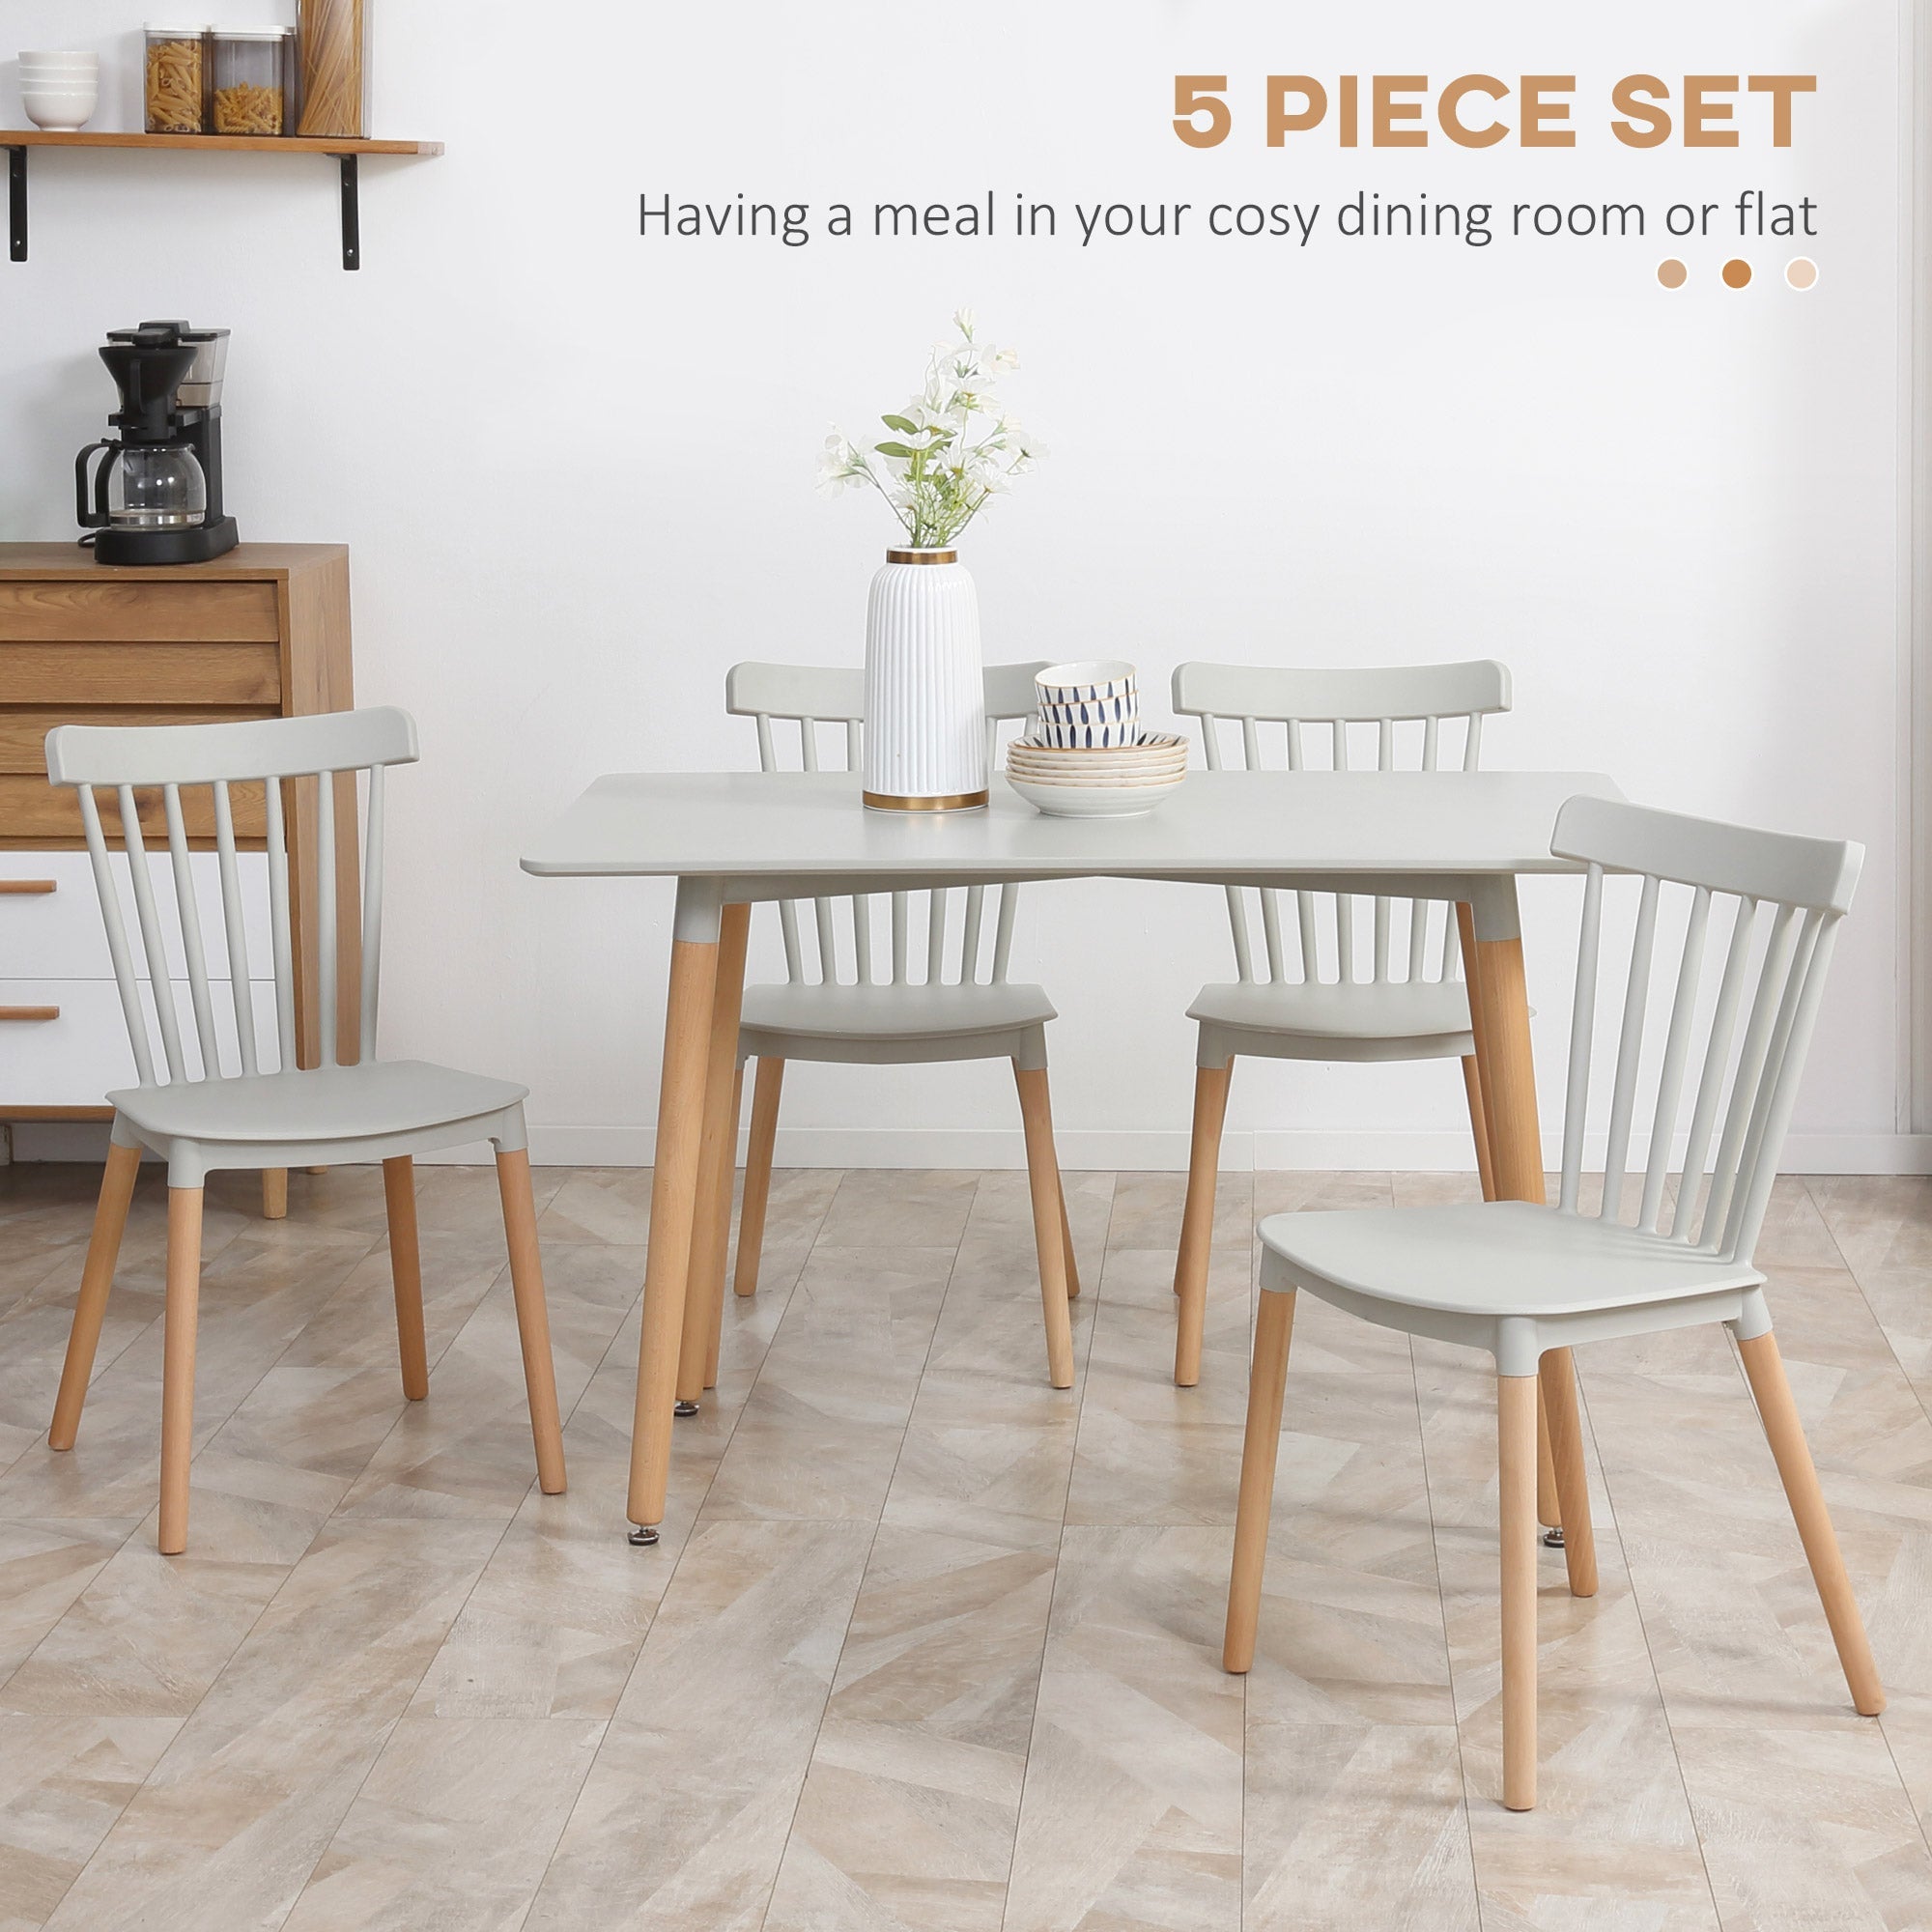 5 Piece Dining Table Set with Beech Wood Legs, Space Saving Table and 4 Chairs for Small Kitchens, Grey-2